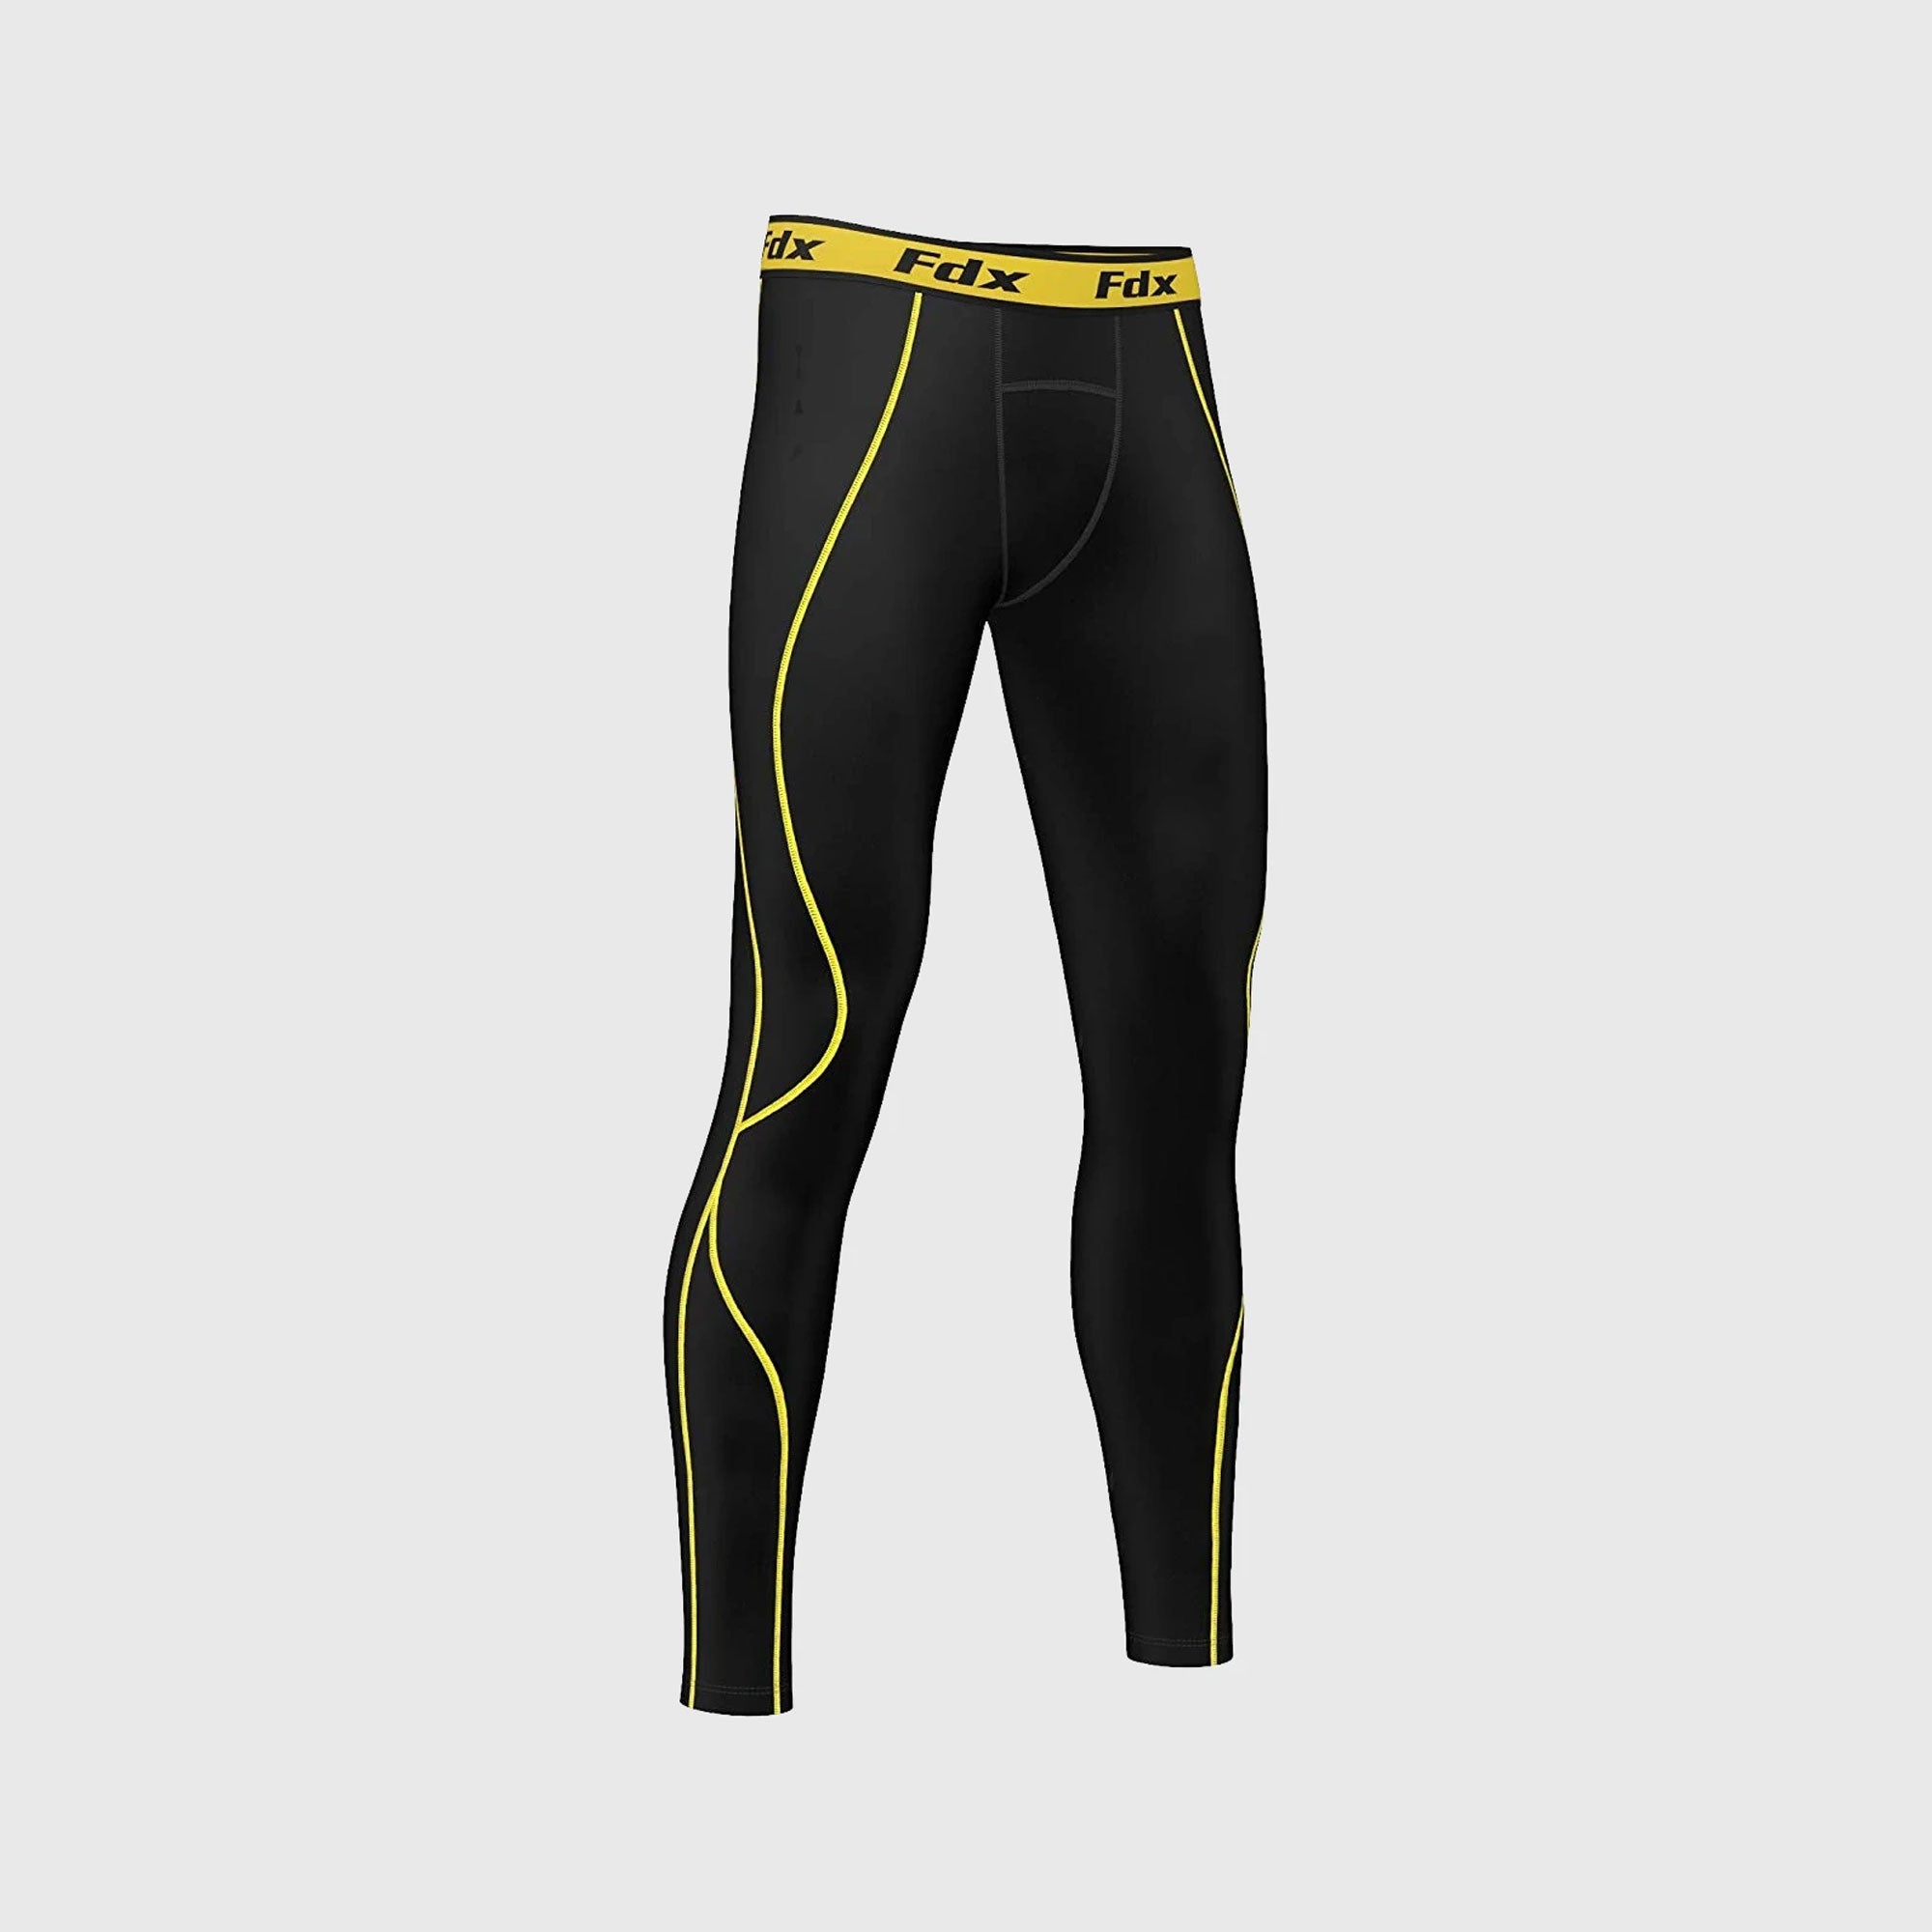 Fdx Black & Yellow Compression Tights Leggings Gym Workout Running Athletic Yoga Elastic Waistband Strechable Breathable Training Jogging Pants - Blitz